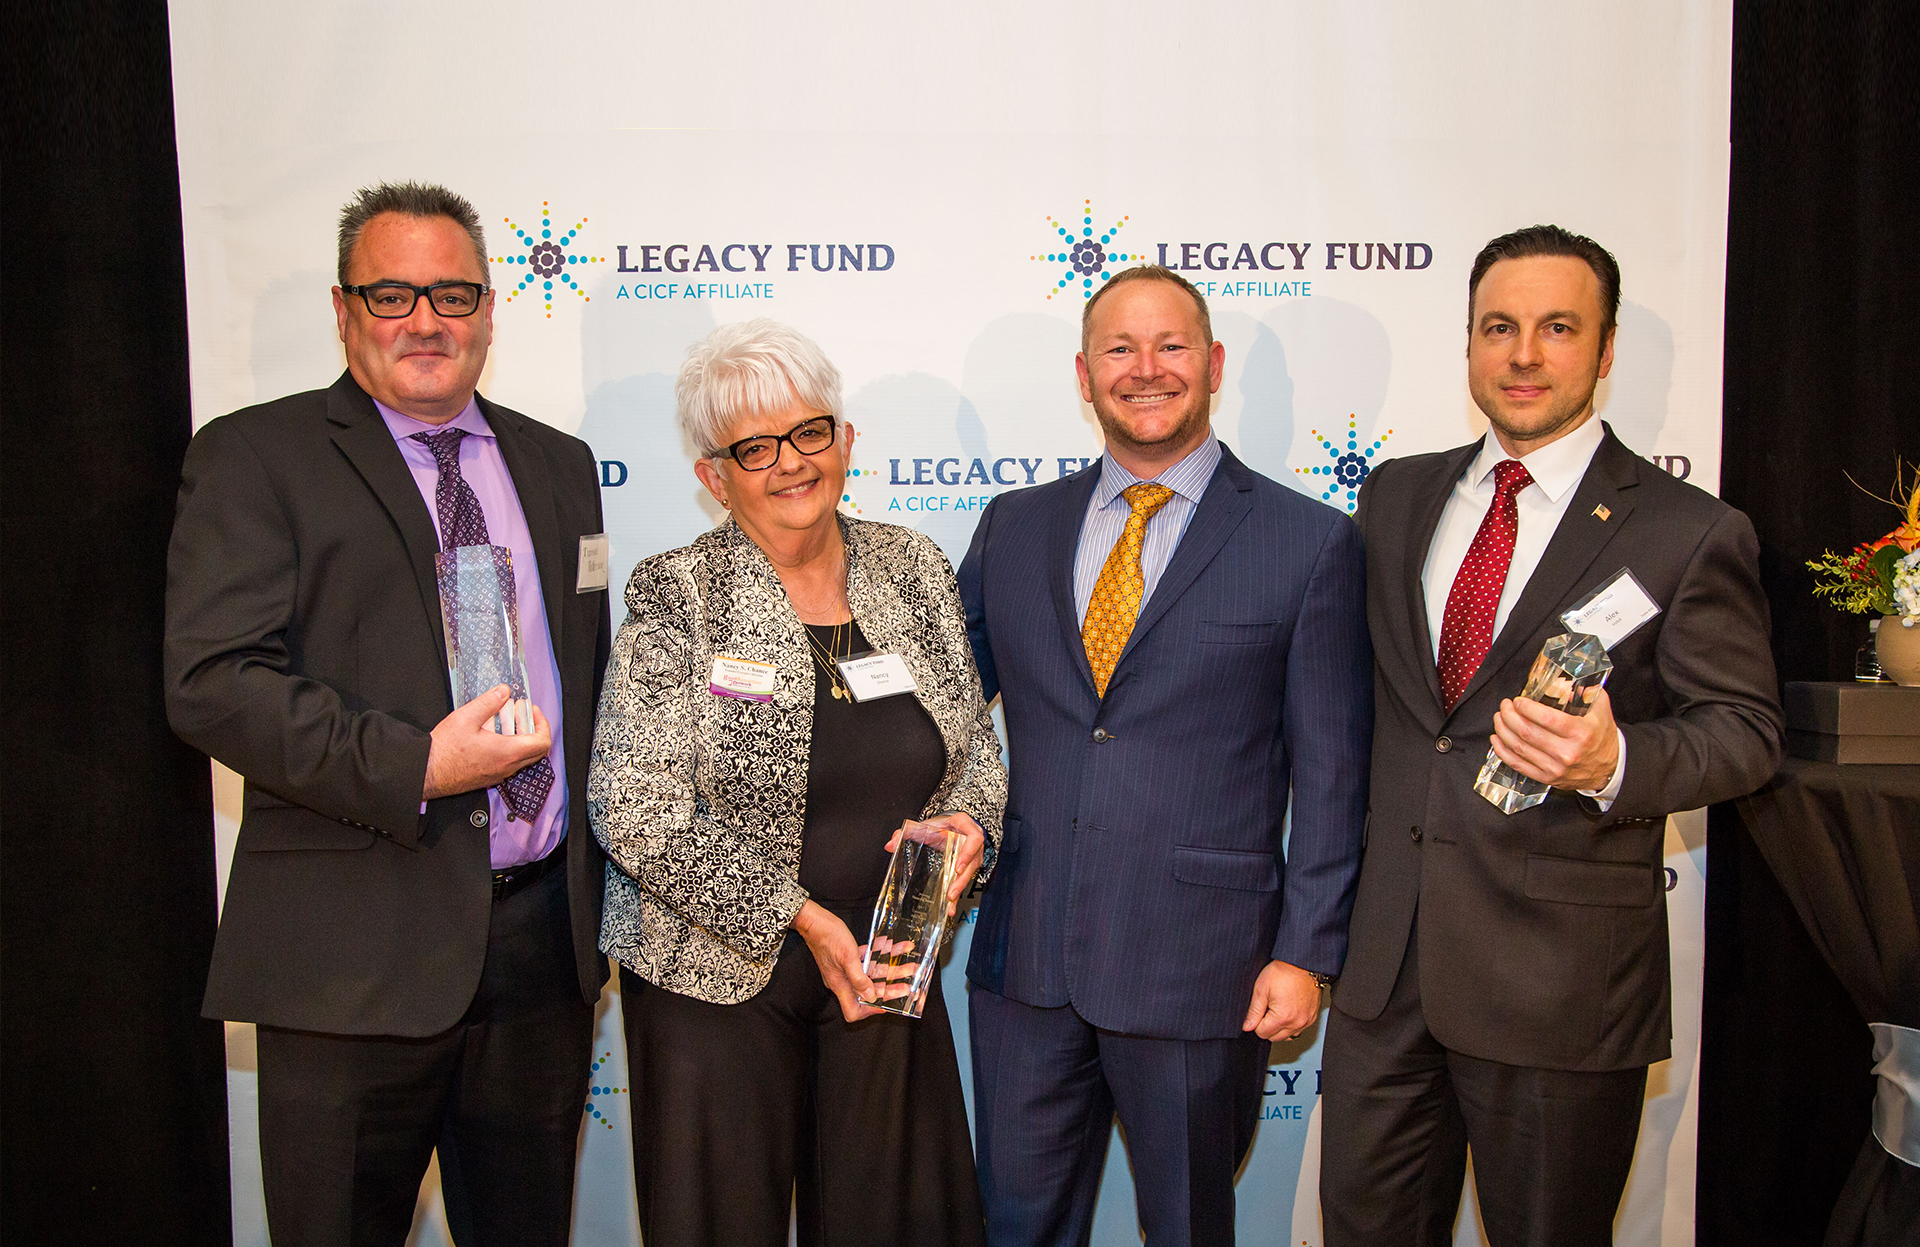 Three Not-For-Profit Organizations Receive $5,000 at Legacy Fund Event ...